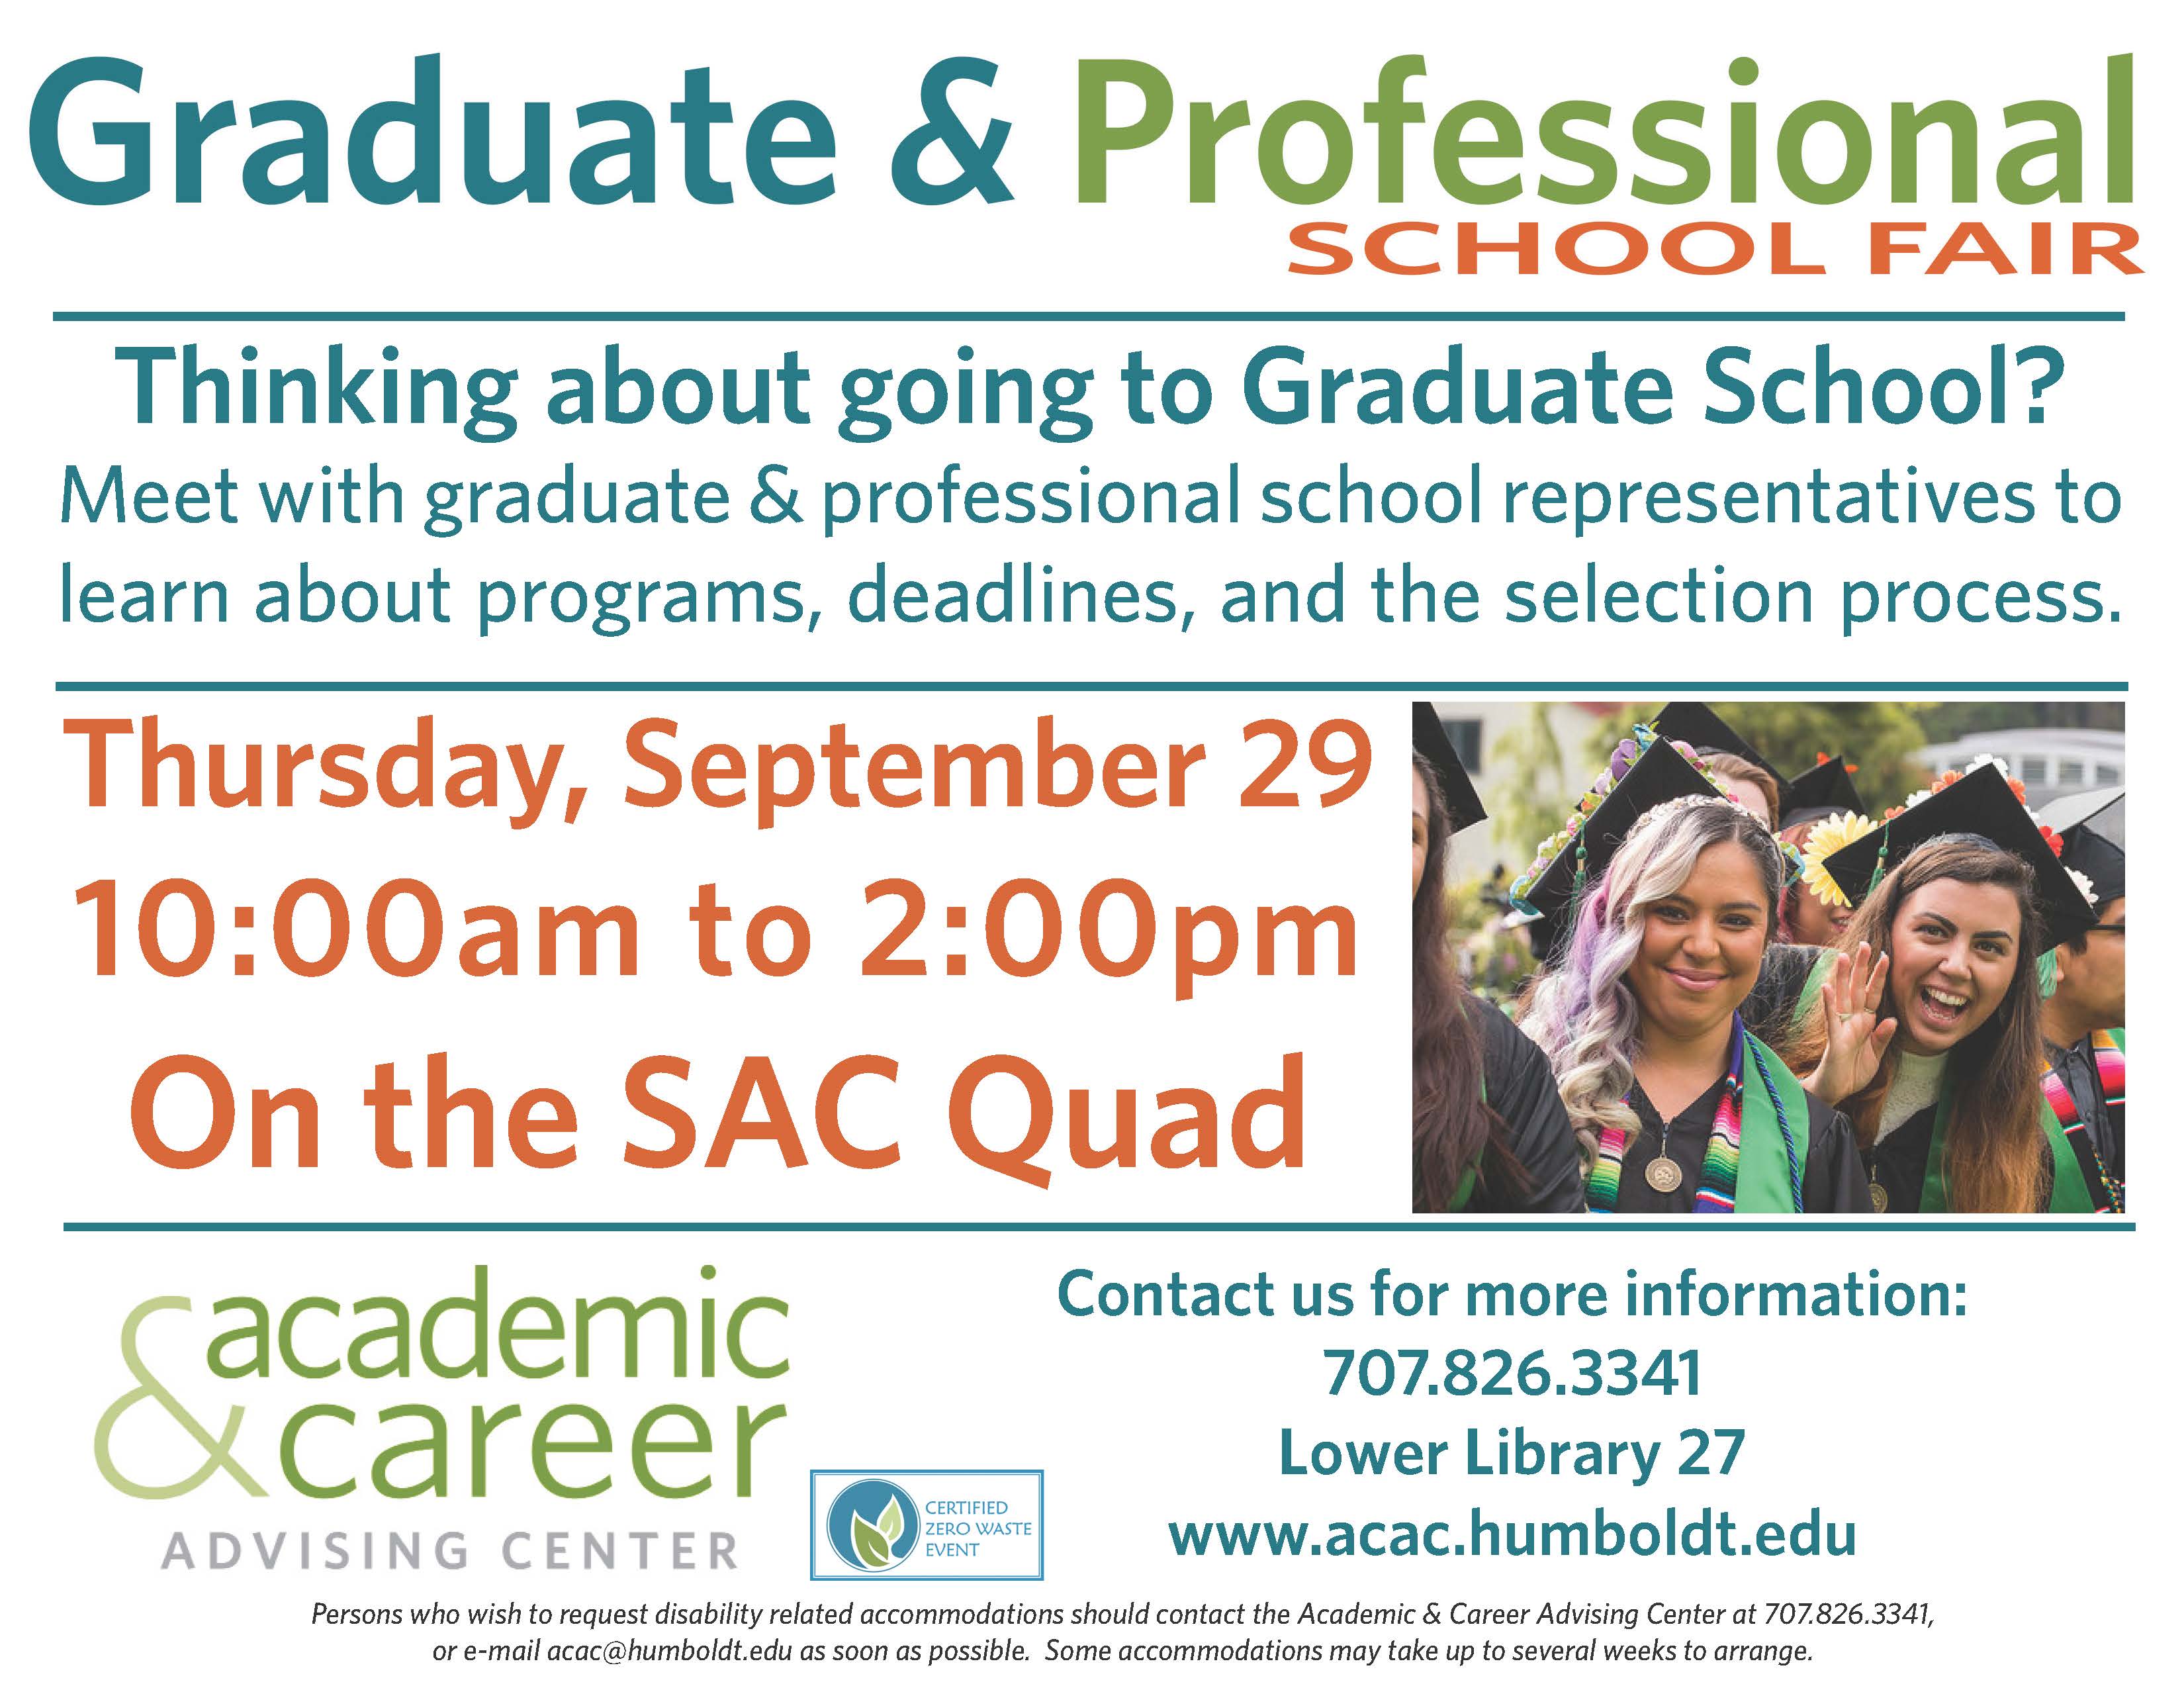 Graduate and Professional School Fair September 29 on the Quad